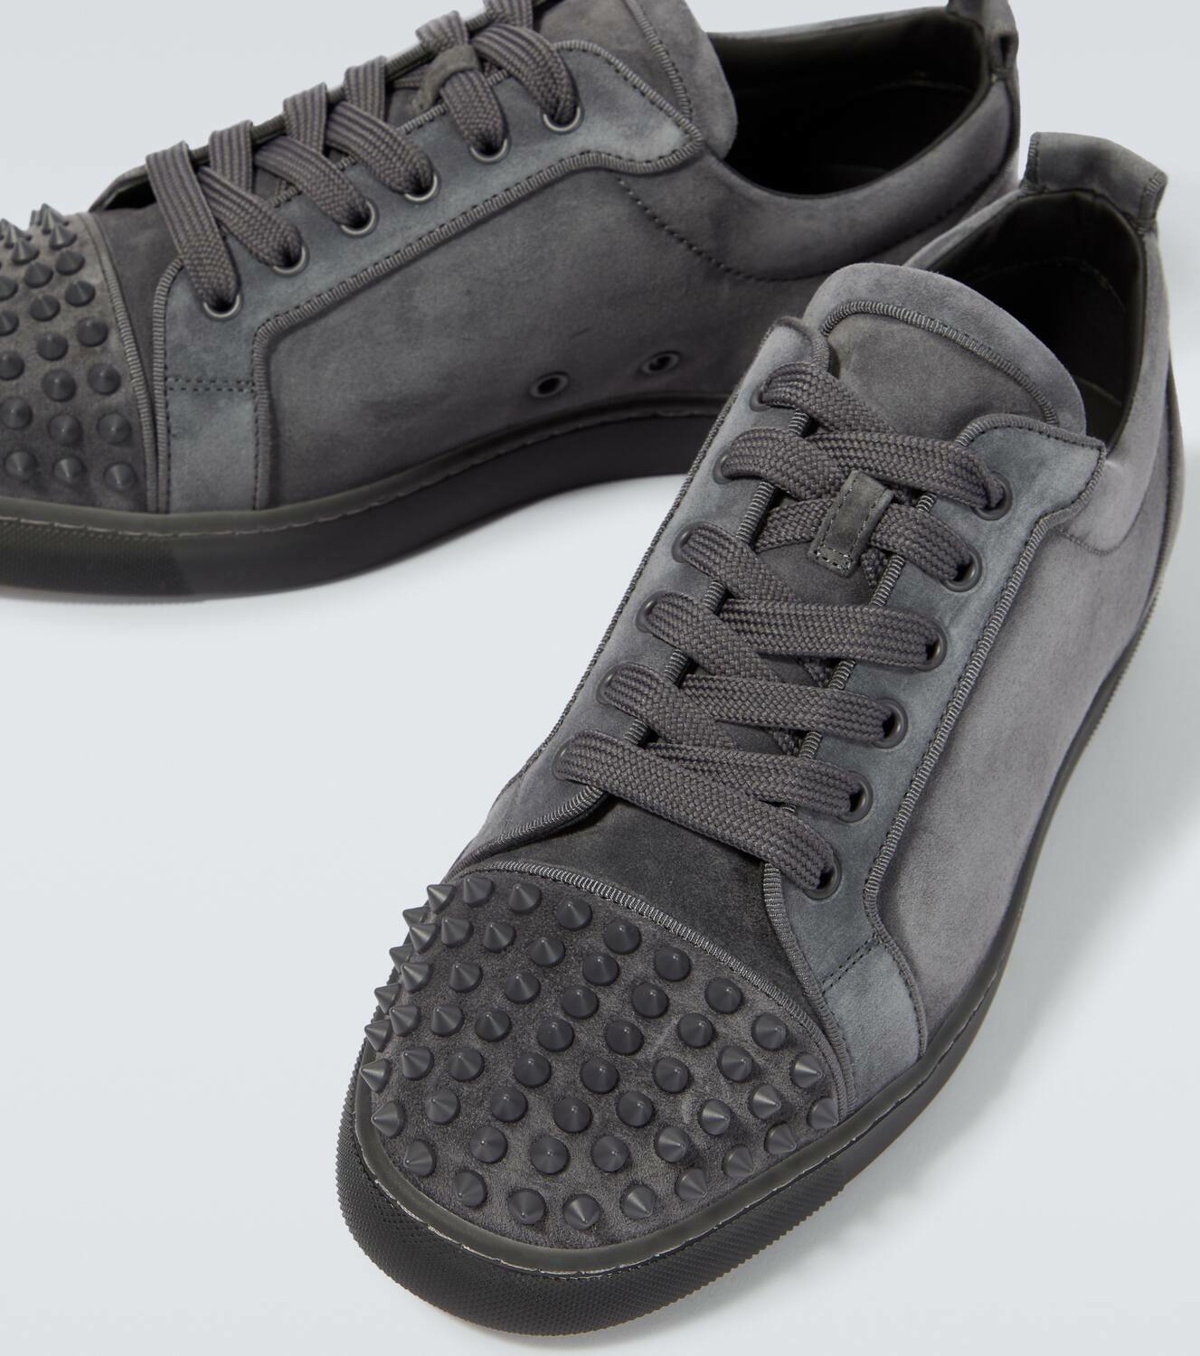 Louis Junior Spikes suede sneakers in grey - Christian Louboutin